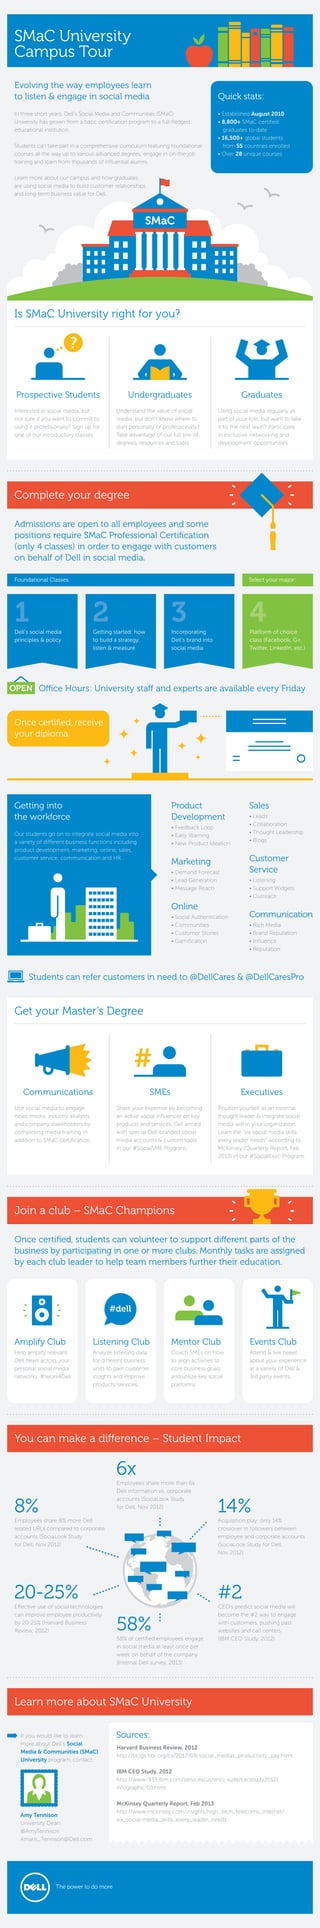 Infographic: Social Media and Community University at Dell